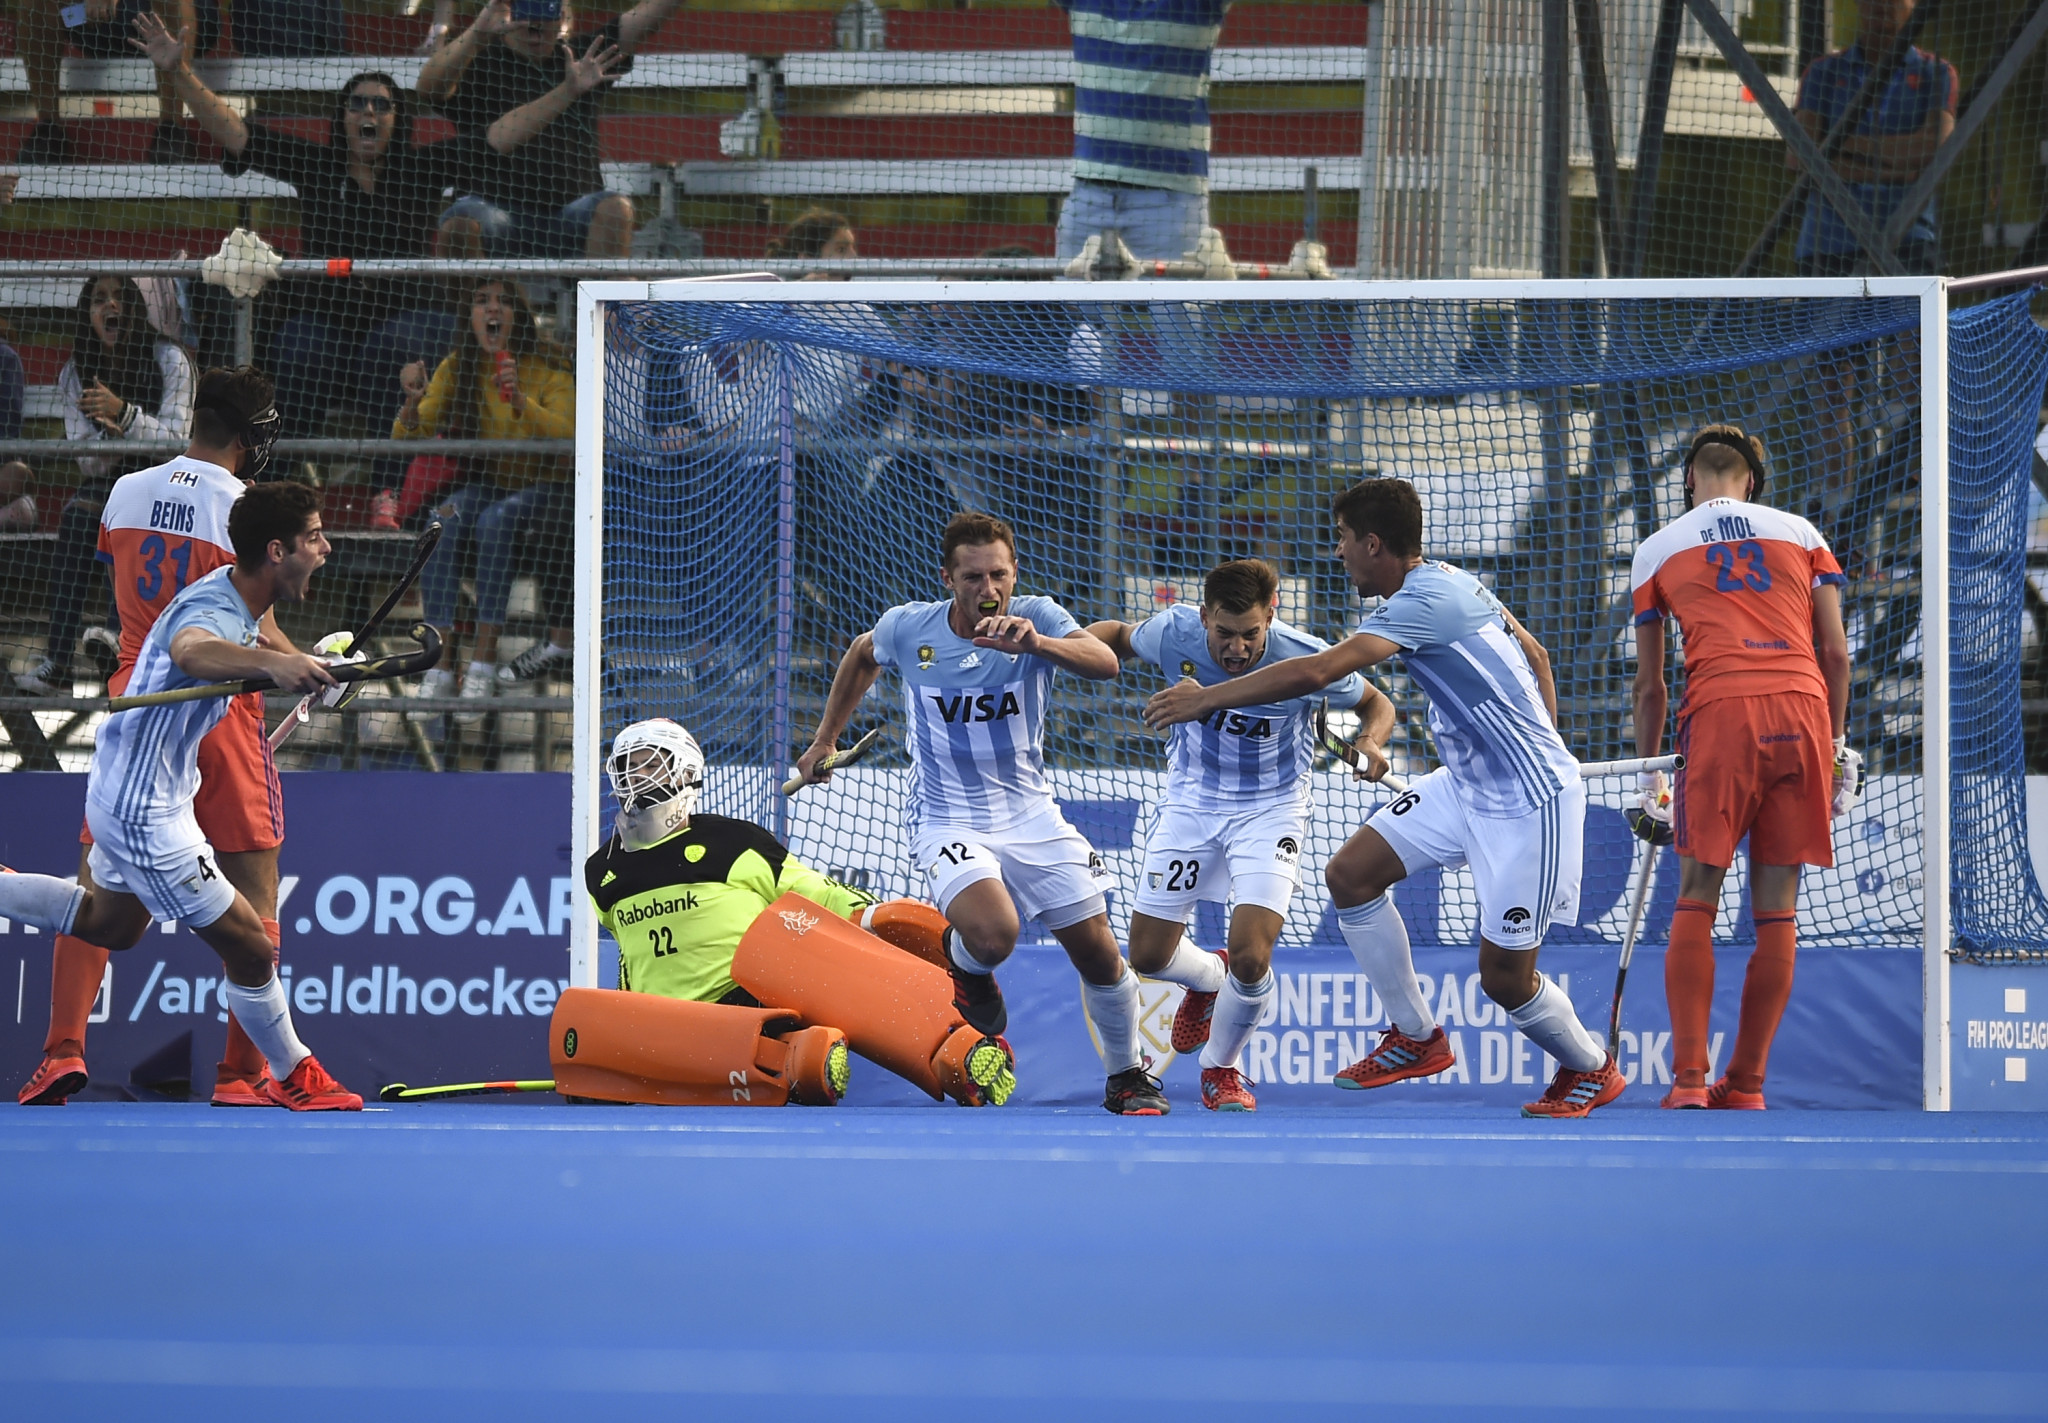 Olympic champions Argentina beat Netherlands to claim first victory in men's FIH Pro League